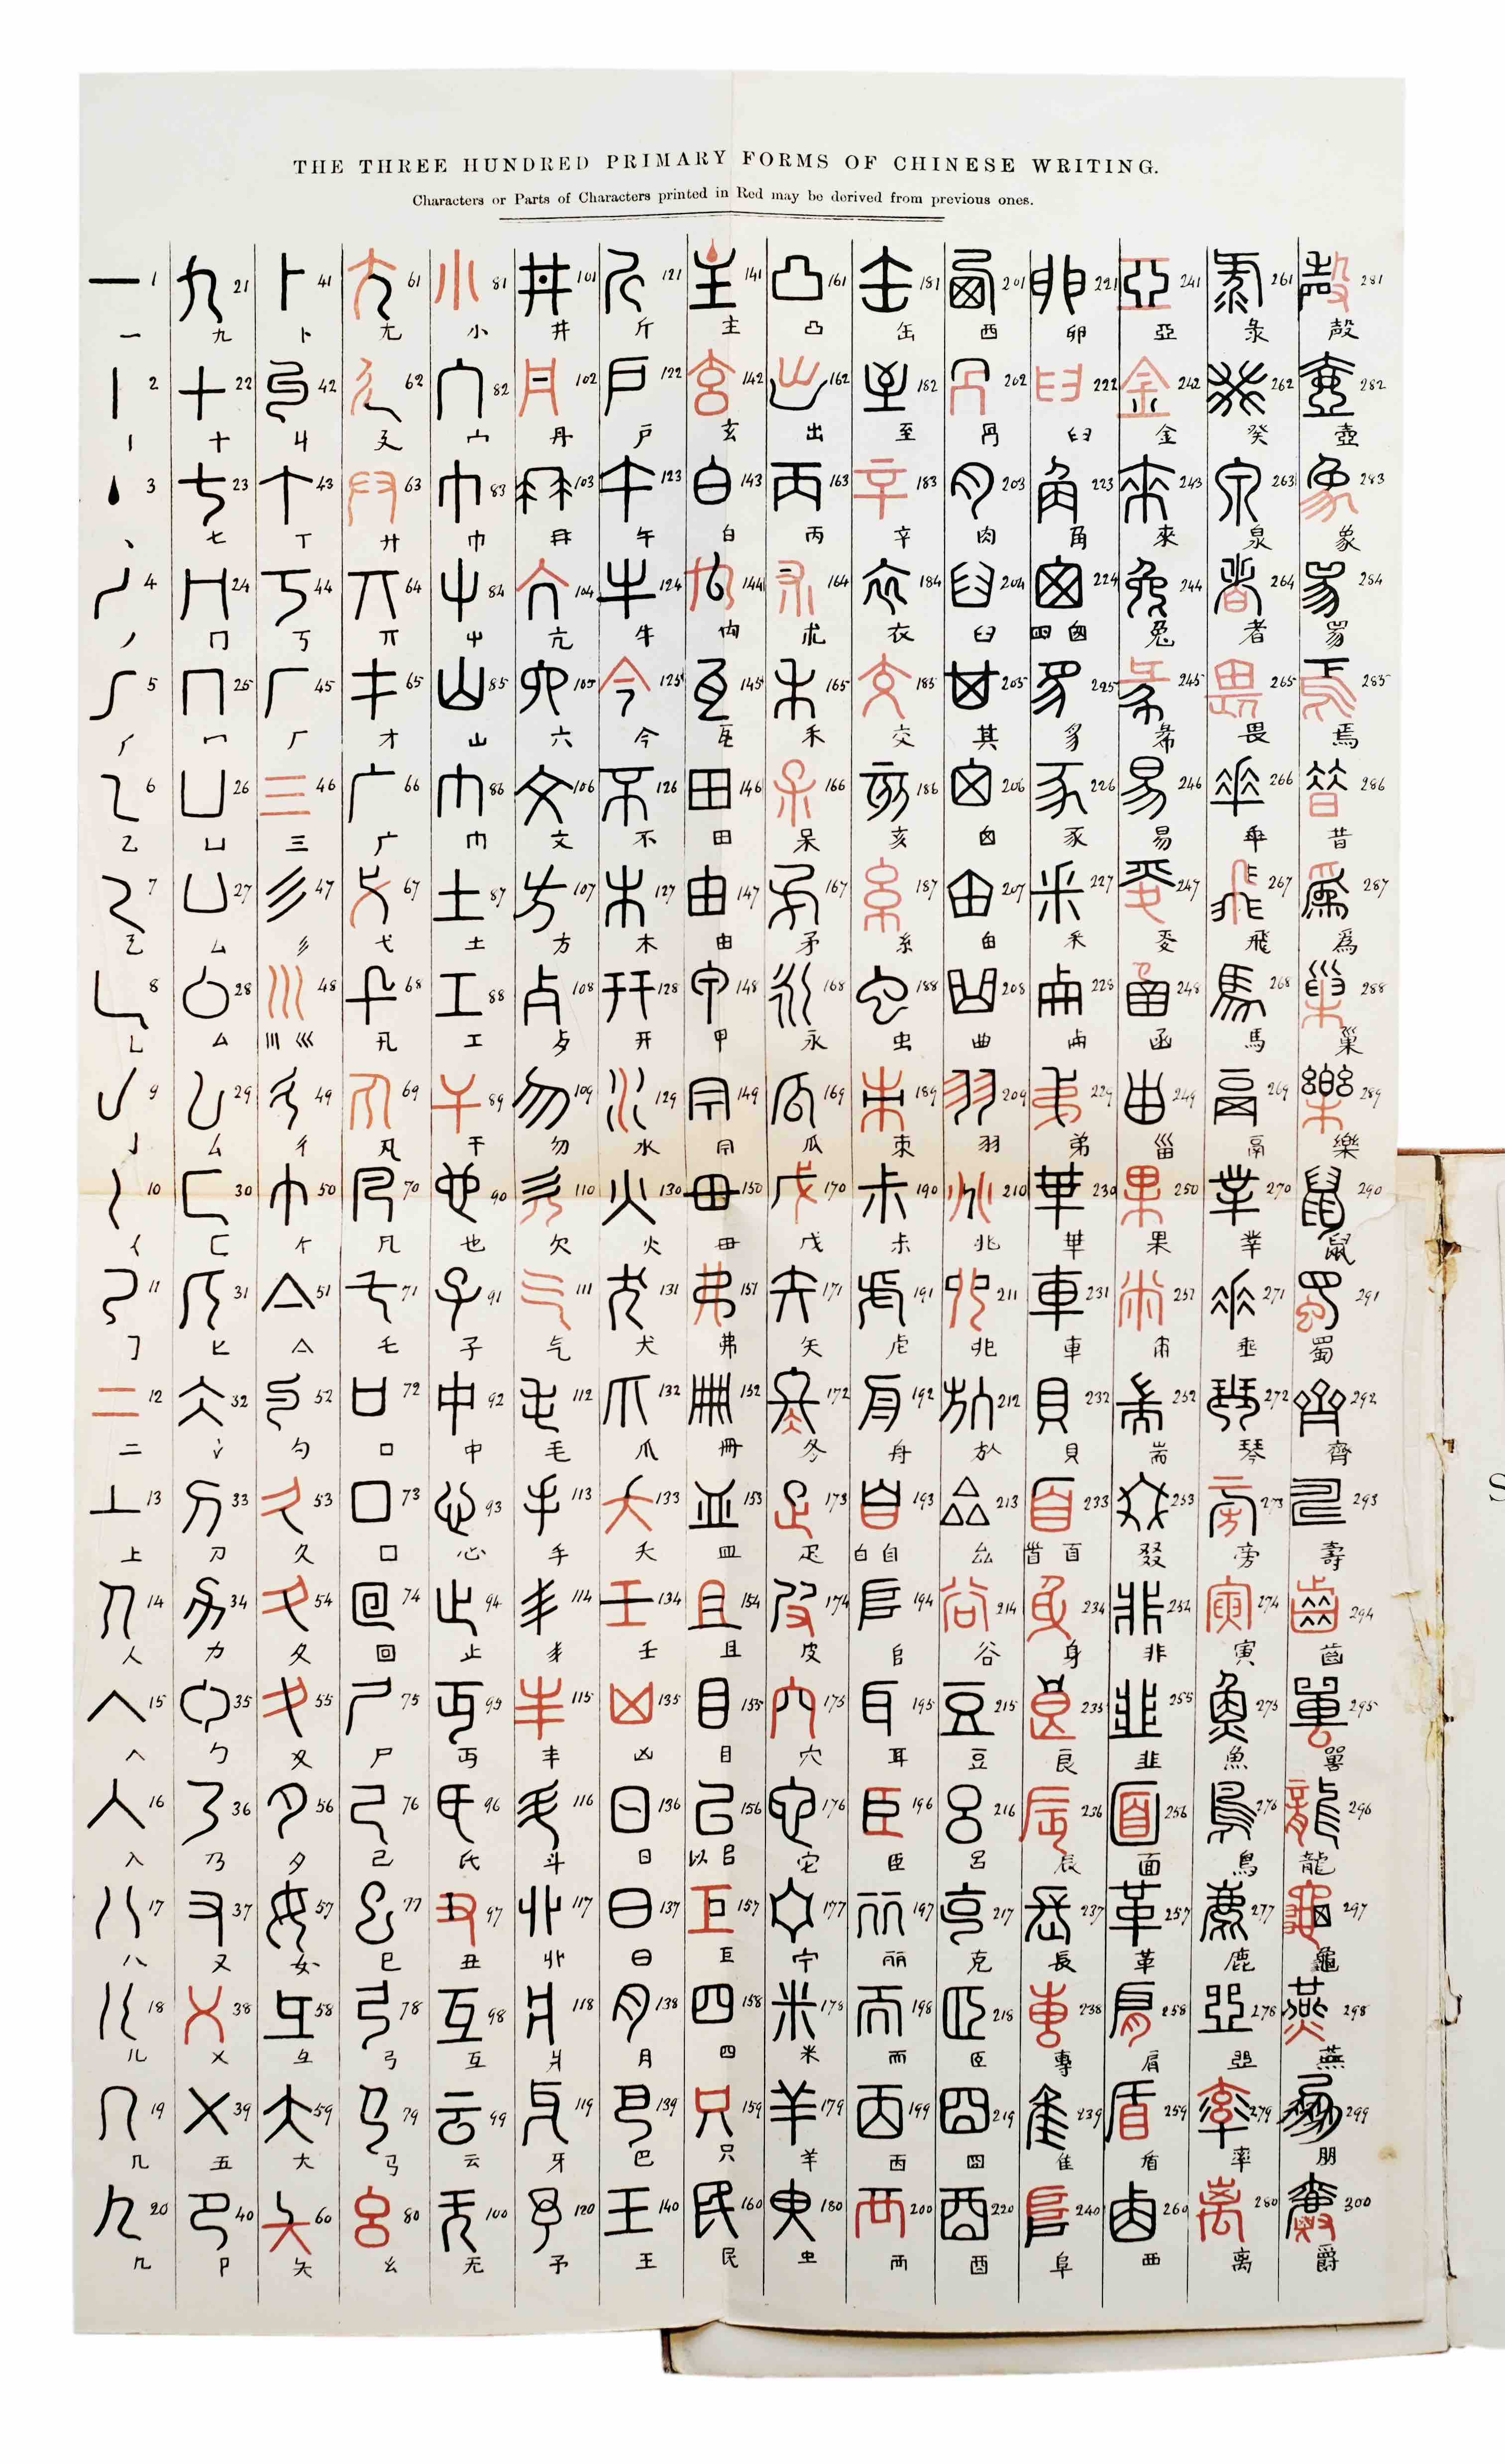 CHALMERS, JOHN: - An Account of the Structure of Chinese Characters under 300 Primary Forms; After the Shwoh-Wan, 100, A.D., and the Phonetic Shwoh-Wan, 1833. London, Trbner & Co., 1882.